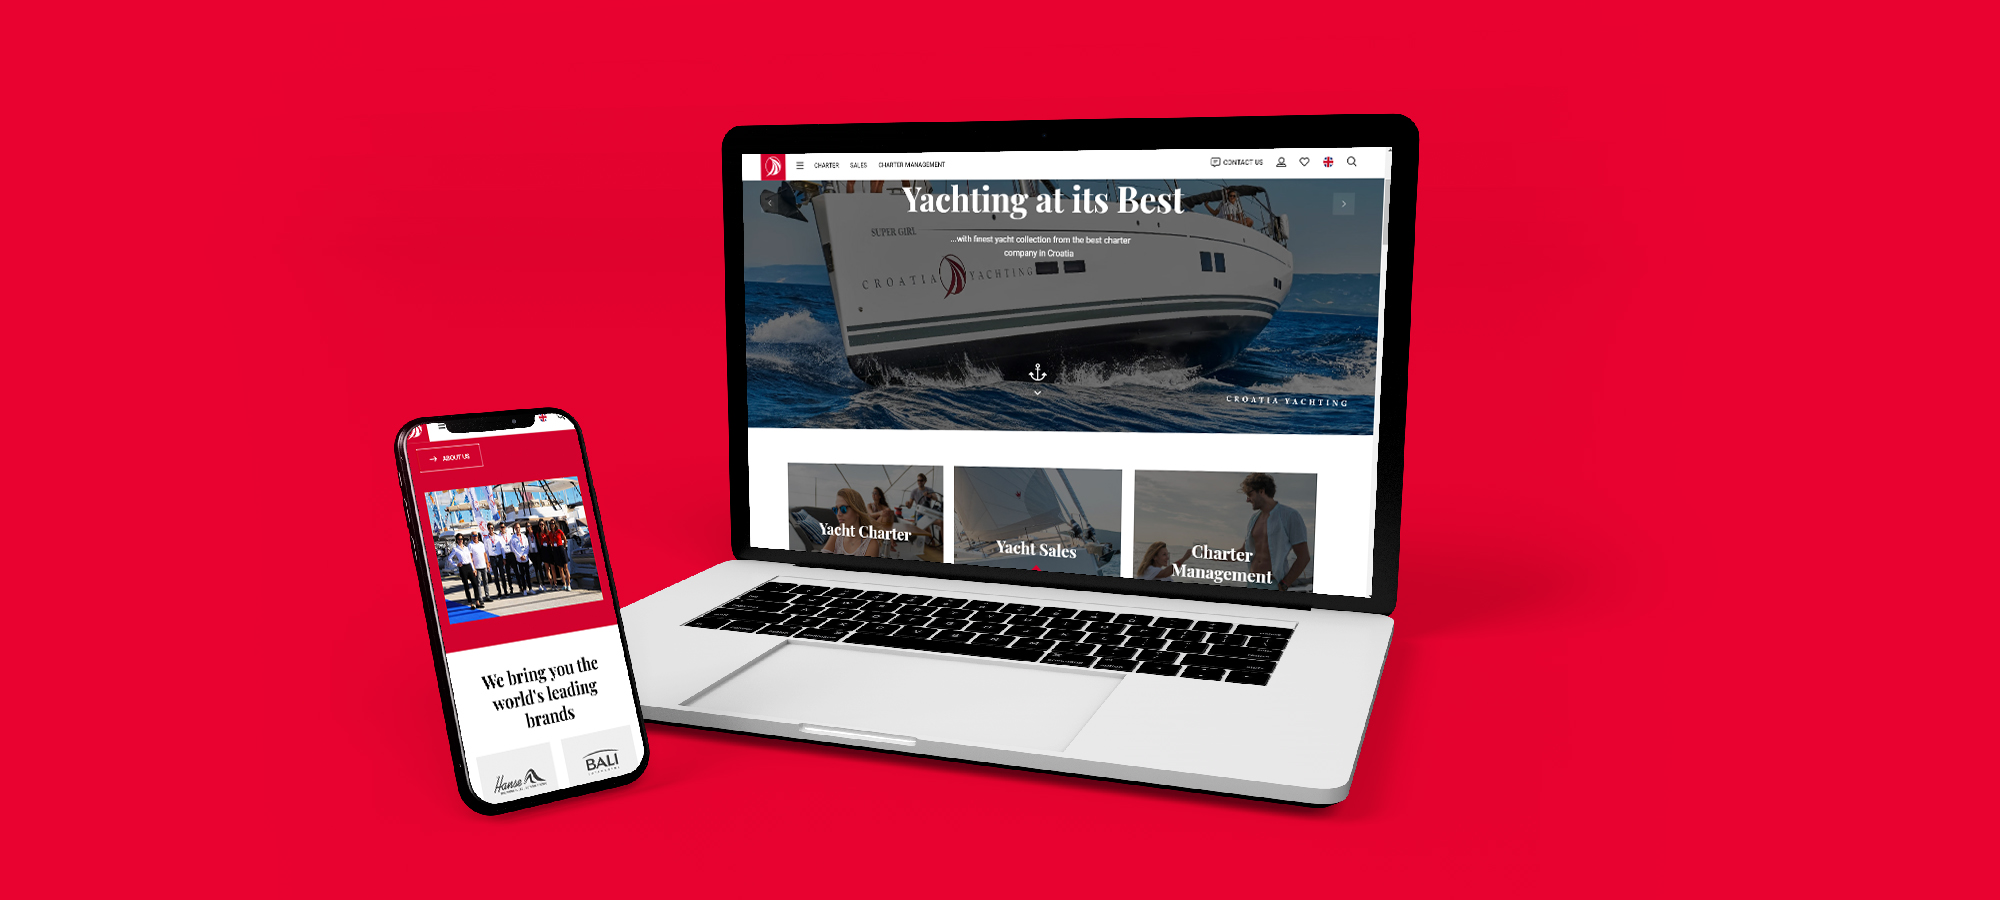 The brand-new Croatia Yachting corporate website is launched!